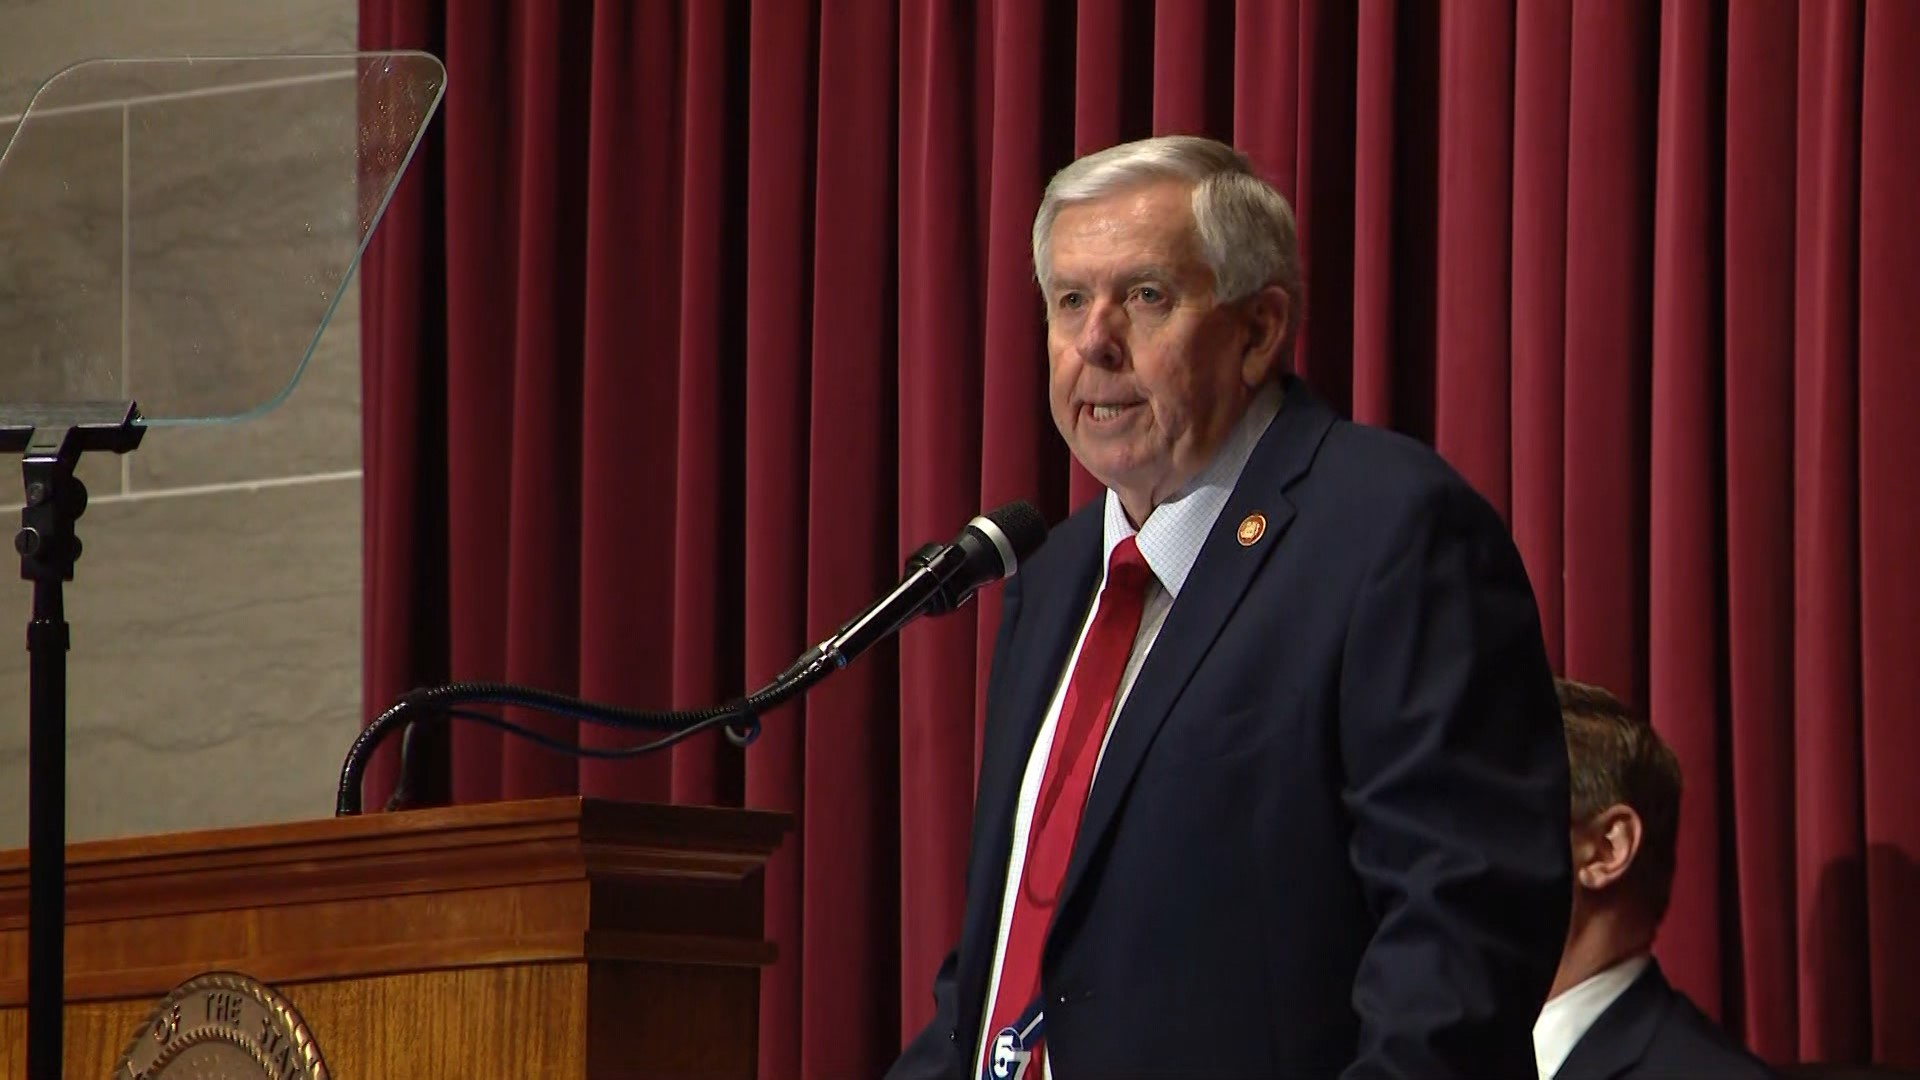 For his final legislative session, Parson, who is barred by term limits from seeking reelection, made relatively modest budget and policy requests of lawmakers.